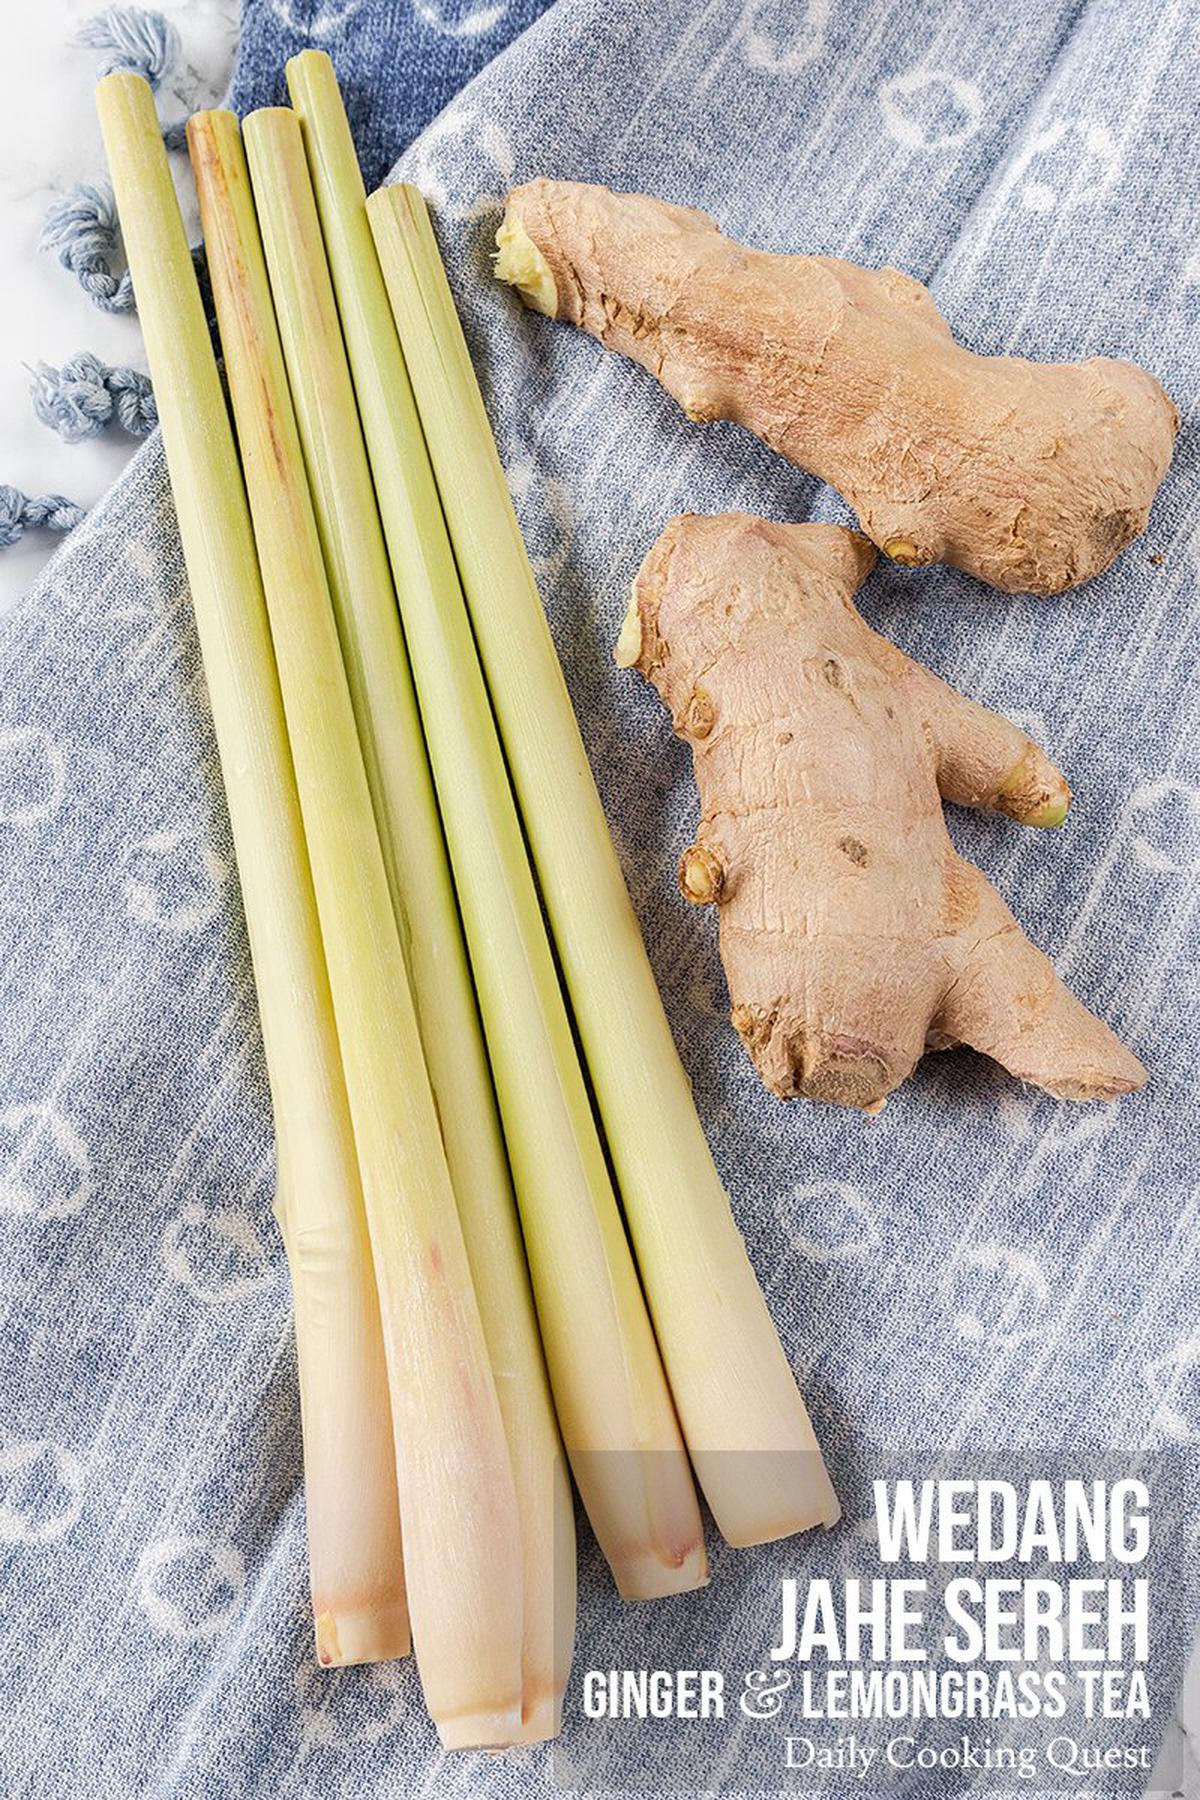 You only need lemongrass and ginger to make Indonesian wednag jahe sereh (ginger and lemongrass tea).